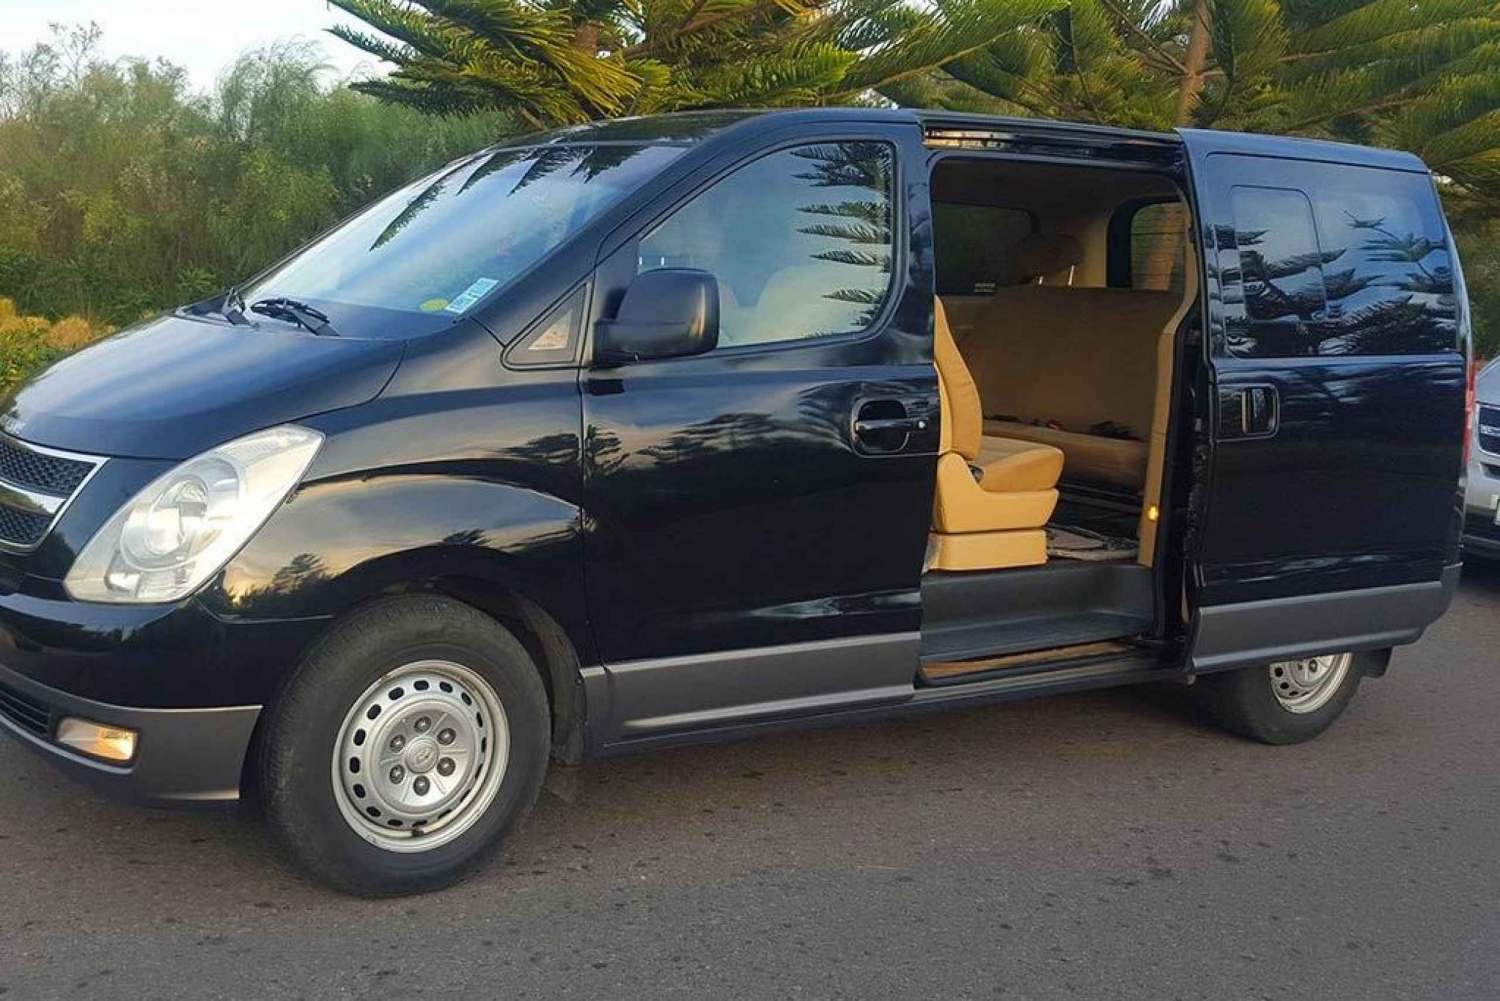 Private Transfer between Marrakech and Casablanca